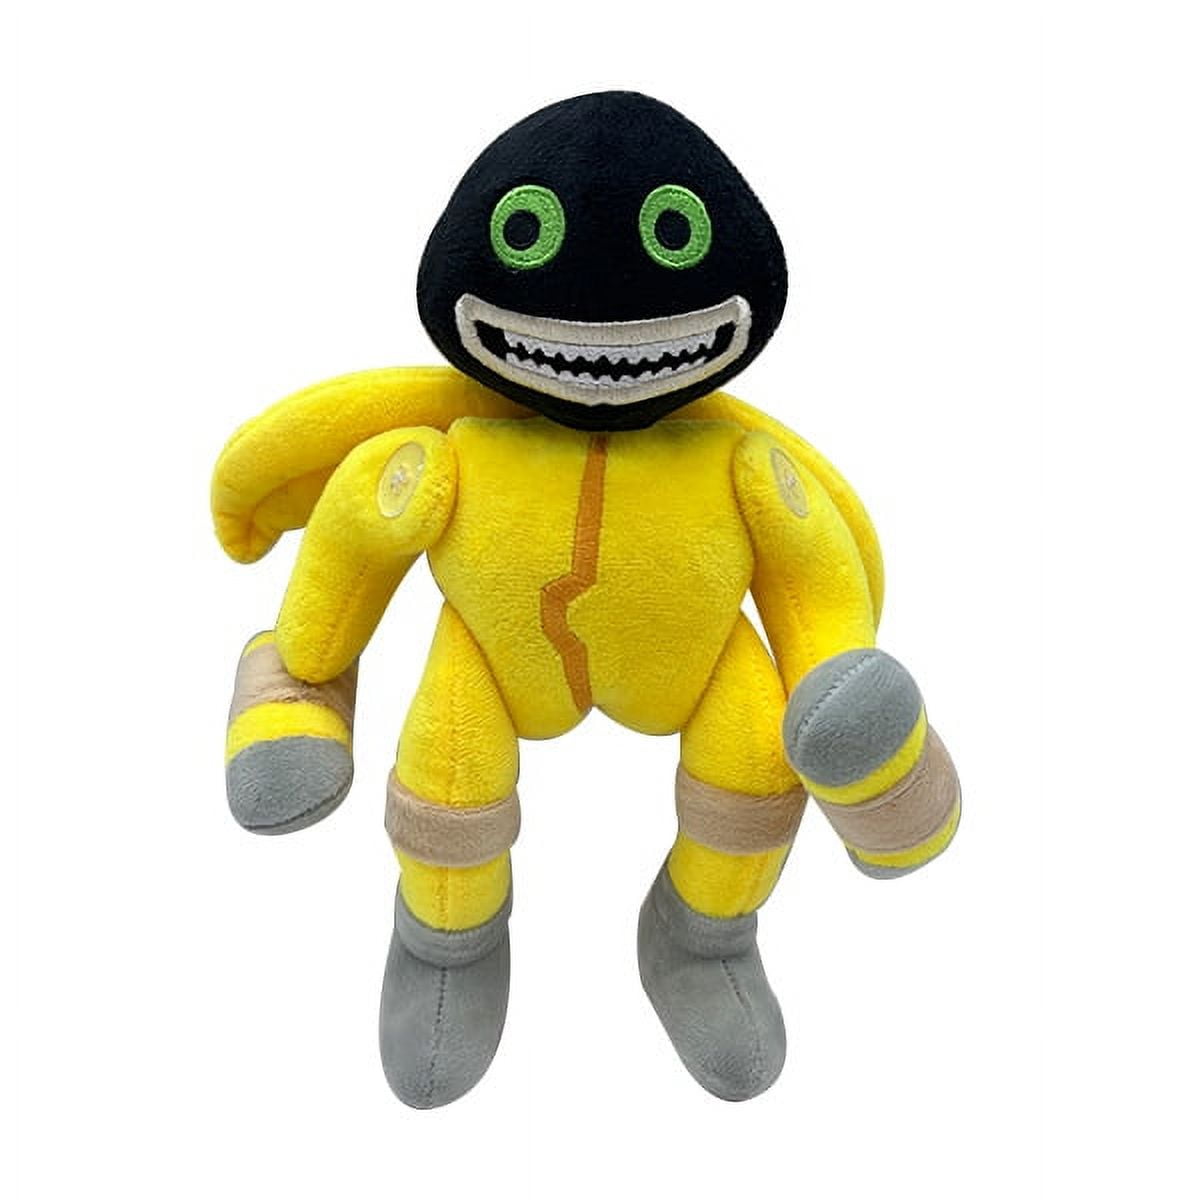  Singing Monsters Toys Building Blocks - Yellow Wubbox Action  Figure Model - My Monsters Epic Wubboox Animal Figure Doll Plush Toy -  Birthday Ideal Gifts Model for Kids,Friends,Game Fans (256 Pieces) 